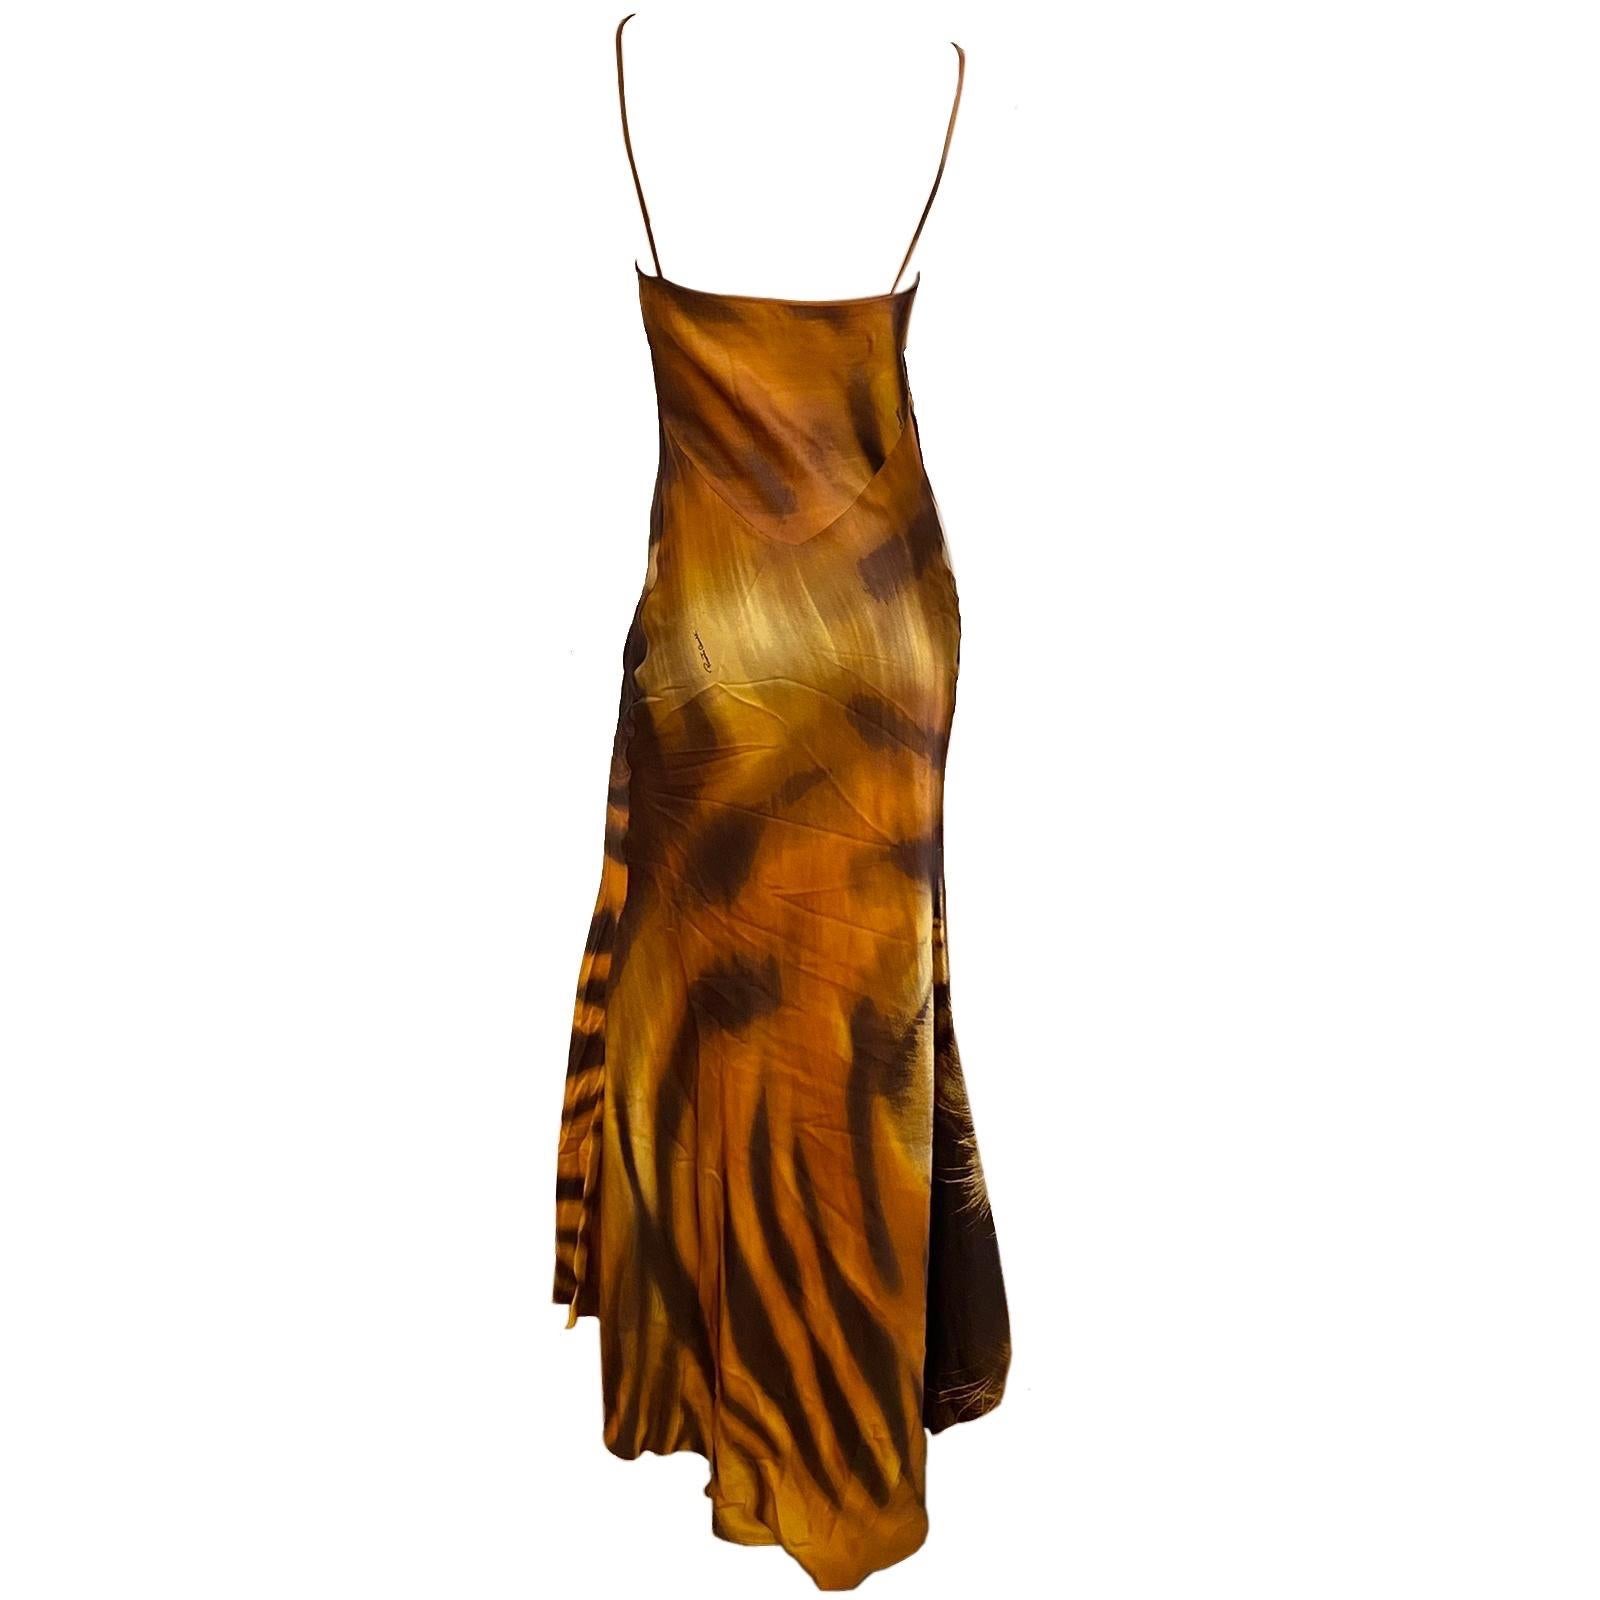 Roberto Cavalli orange Tiger Print Evening Gown from the Fall/Winter 2000 collection. Bias cut with spaghetti strap and back train. Also seen on runway and more famously on Cindy Crawford in Rome for “Donna Sotto le Stelle”, 2000.

Size S
Total